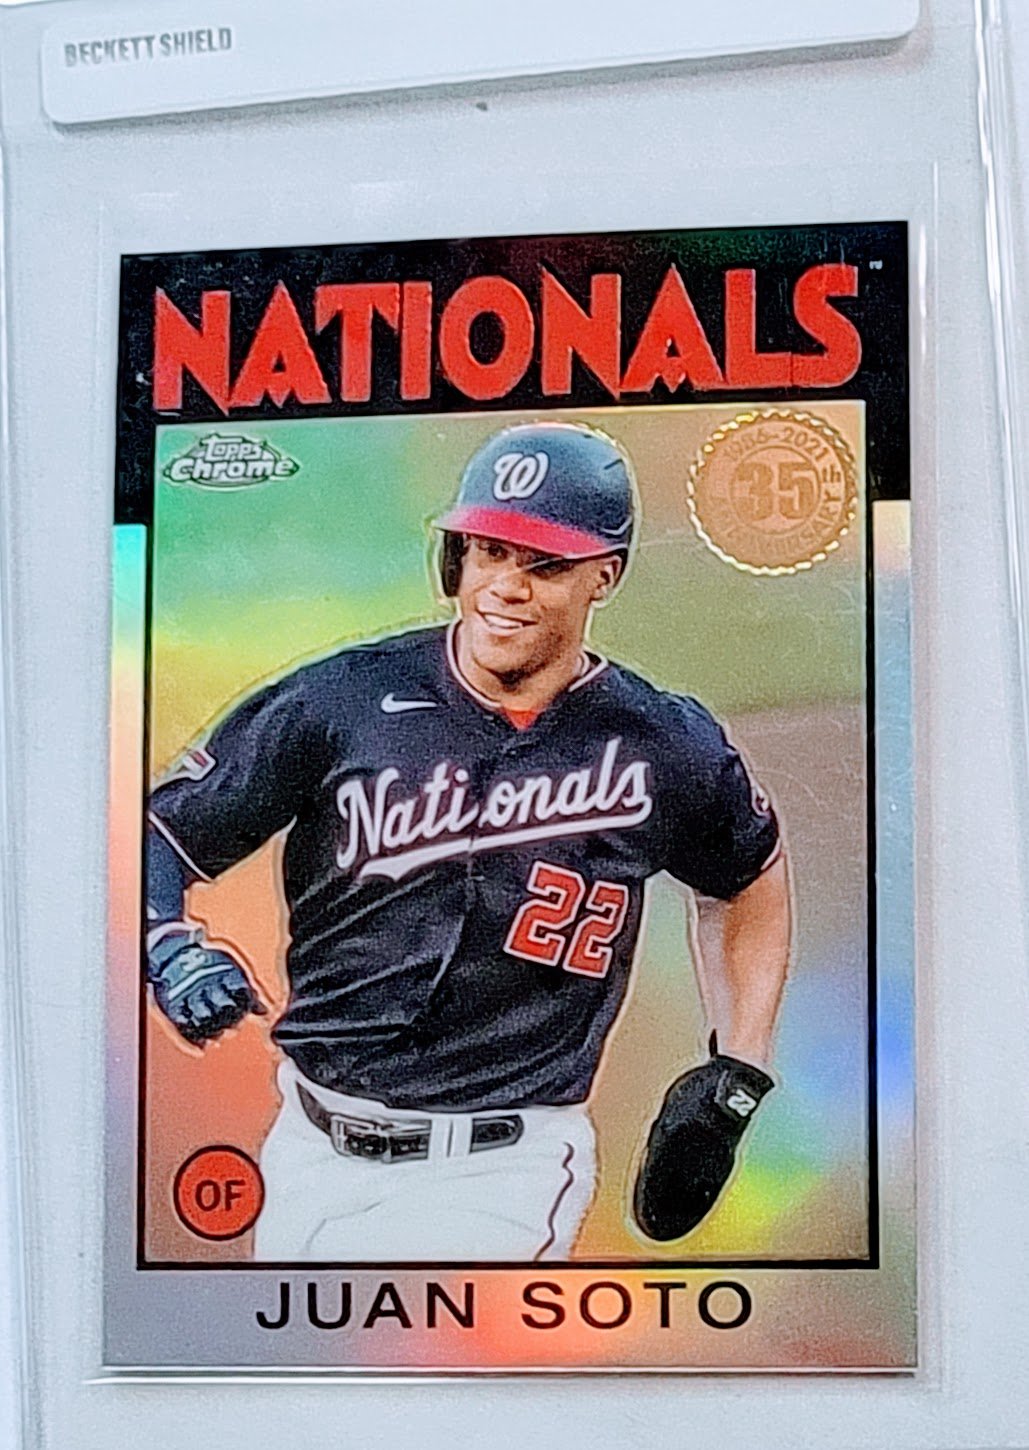 2021 Topps Chrome Juan Soto 1986 35th Anniversary Refractor Baseball Trading Card TPTV simple Xclusive Collectibles   